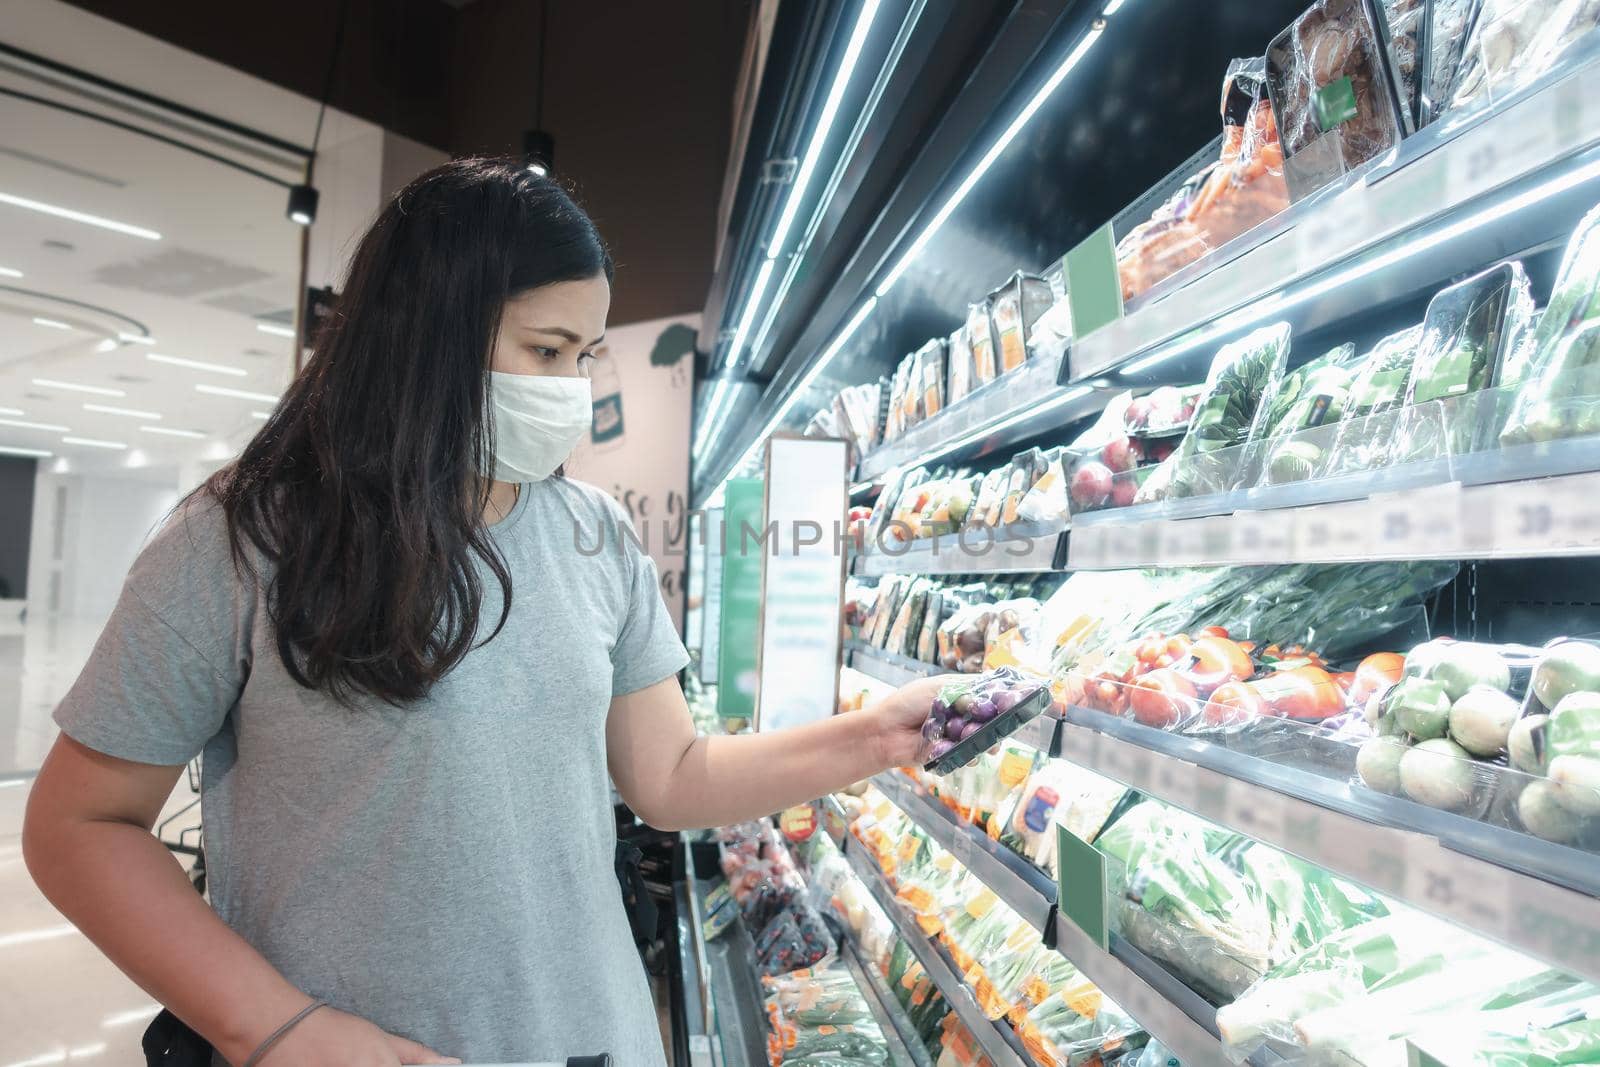 Customer Asian Woman Wearing Face Mask With Shopping Cart in Supermarket Department Store Shop While Choosing and Looking Vegetables on Shelf During Covid-19 Pandemic. Coronavirus Covid Situation  by MahaHeang245789